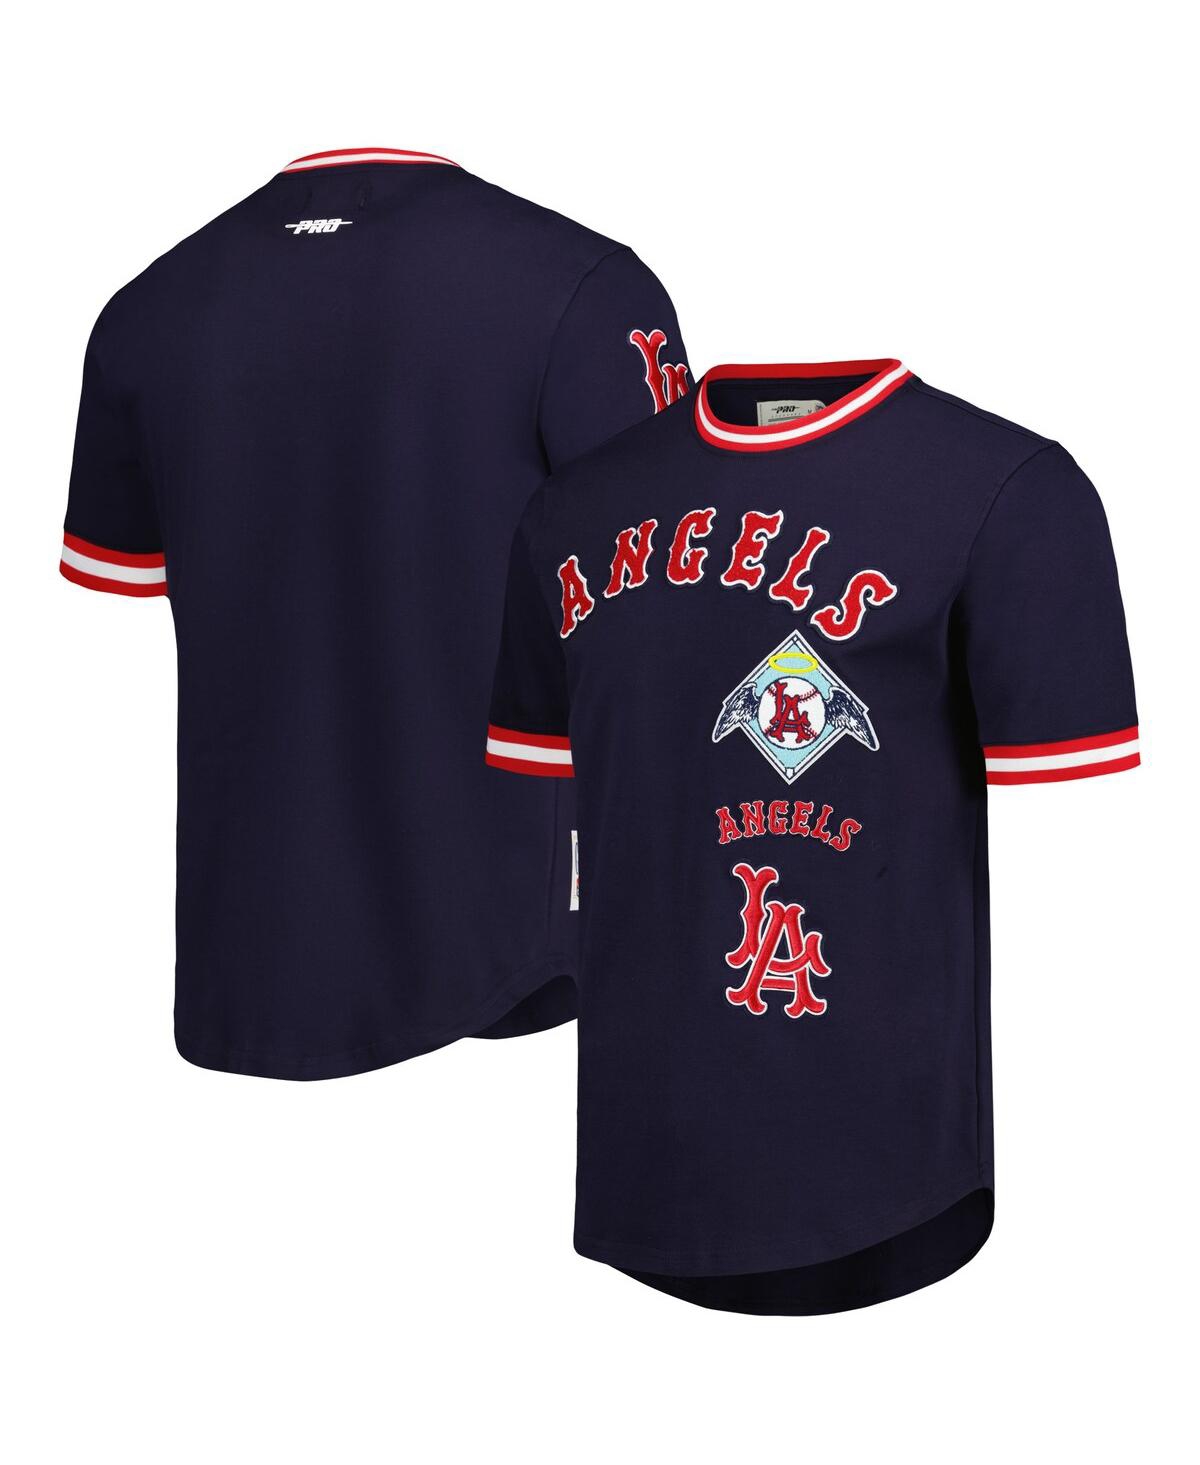 Pro Standard Men's  Navy Los Angeles Angels Cooperstown Collection Retro Classic T-shirt